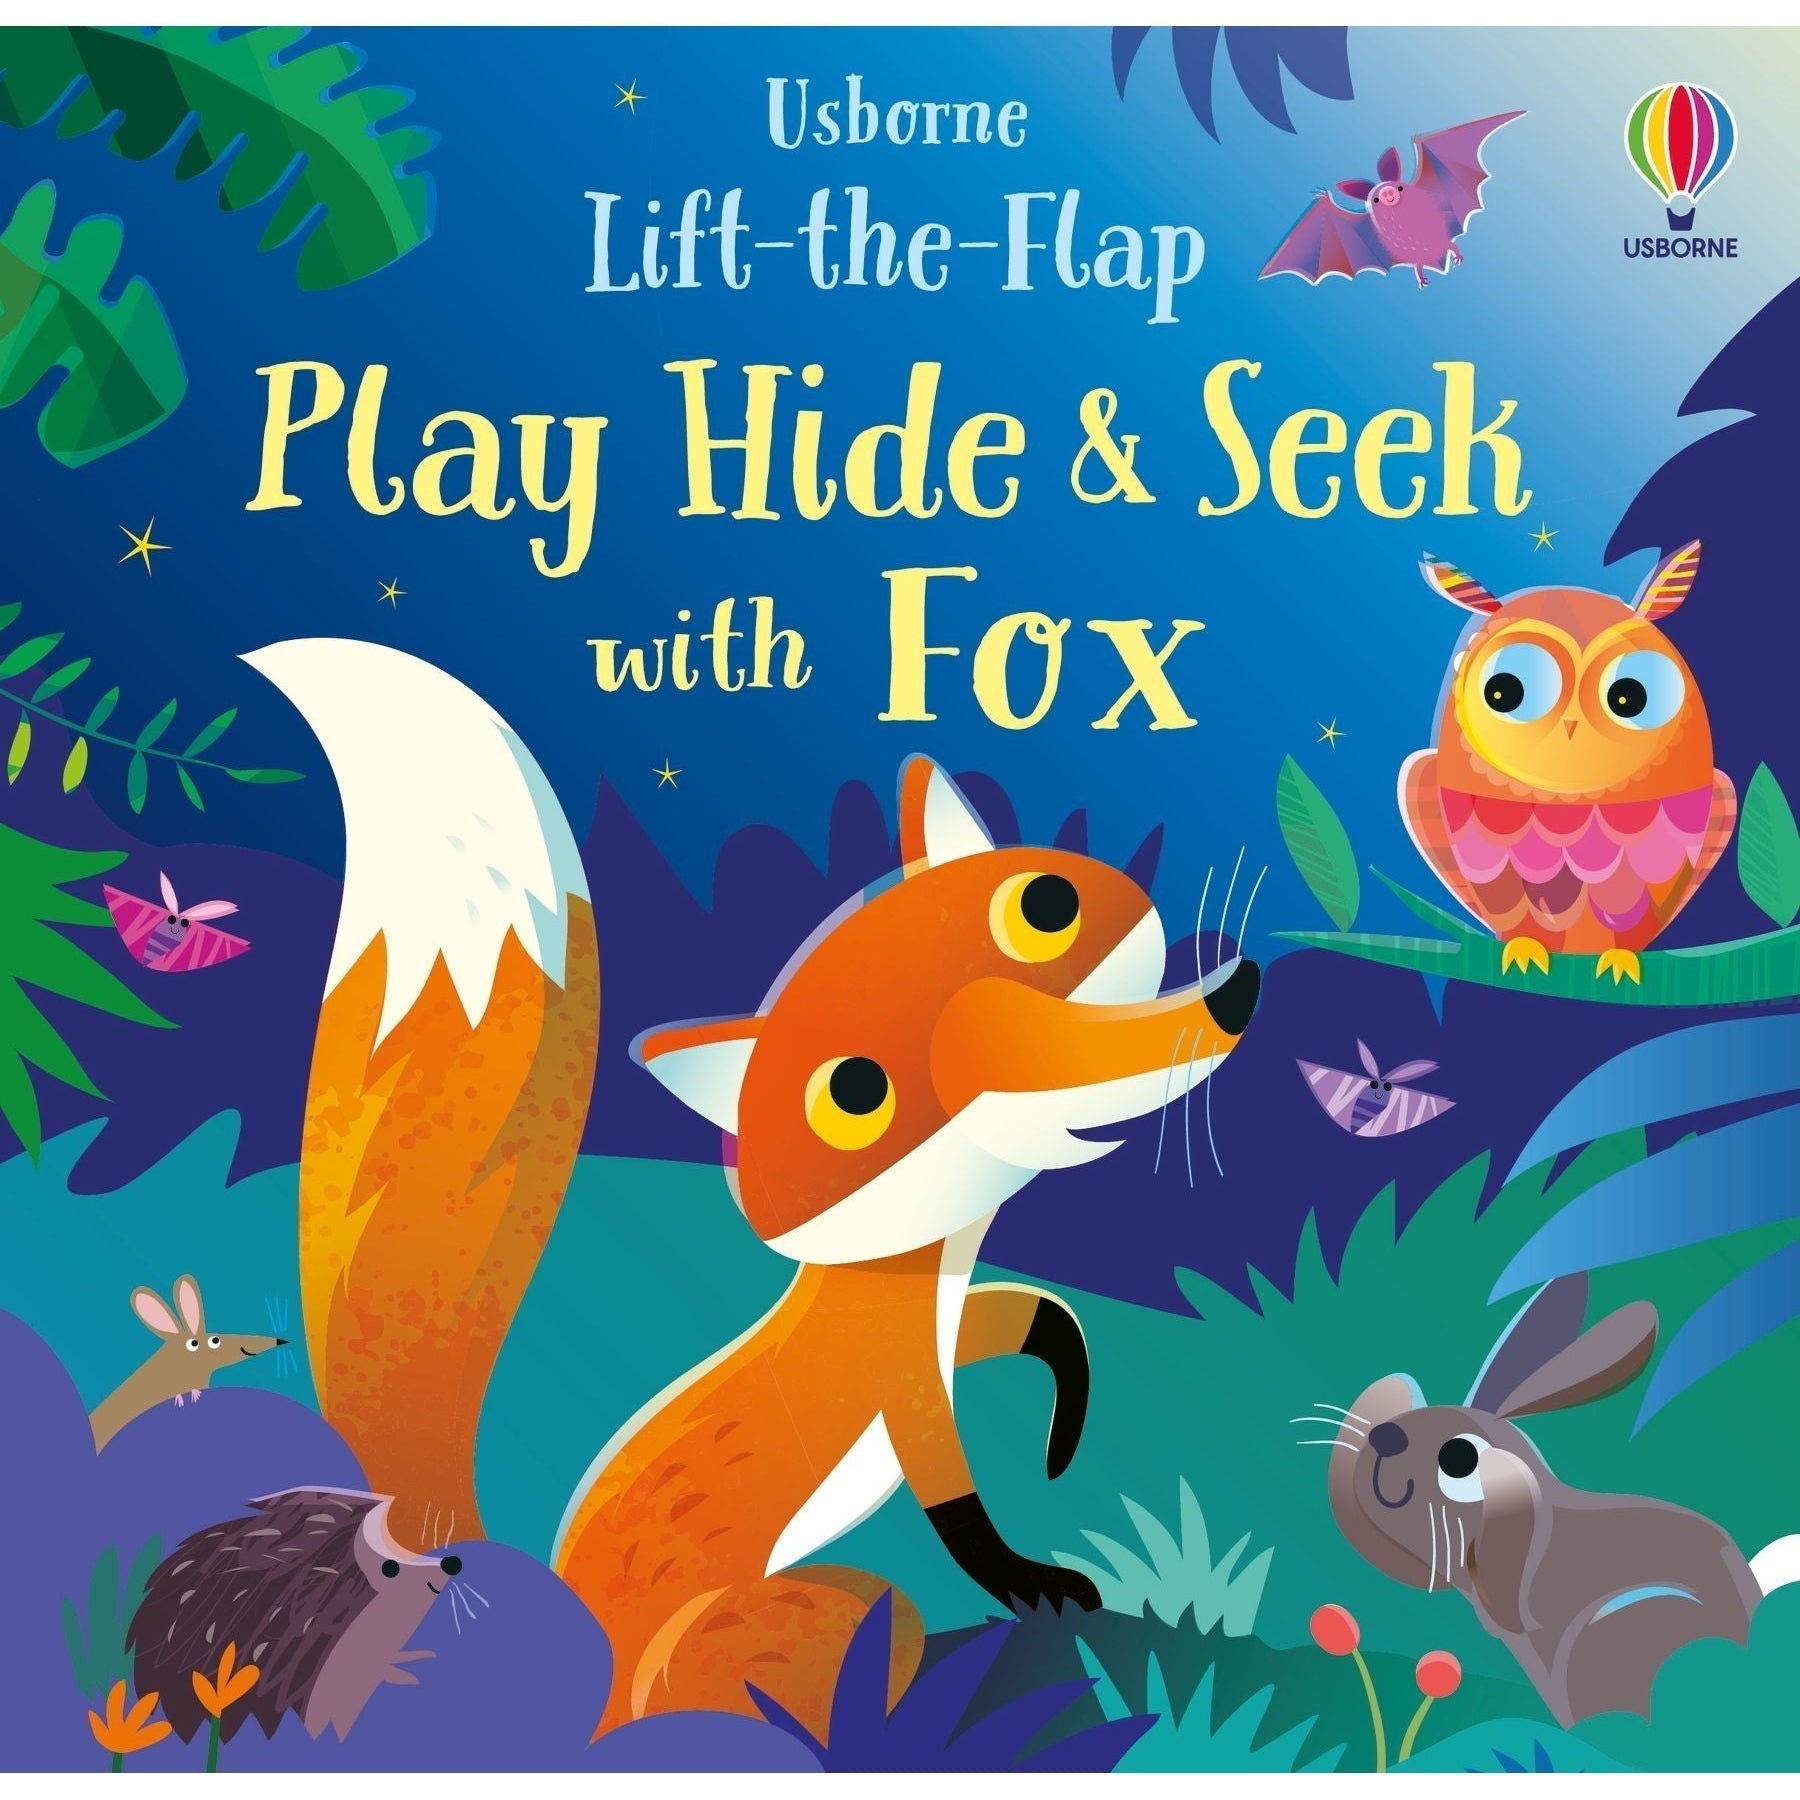 Play Hide and Seek with Fox